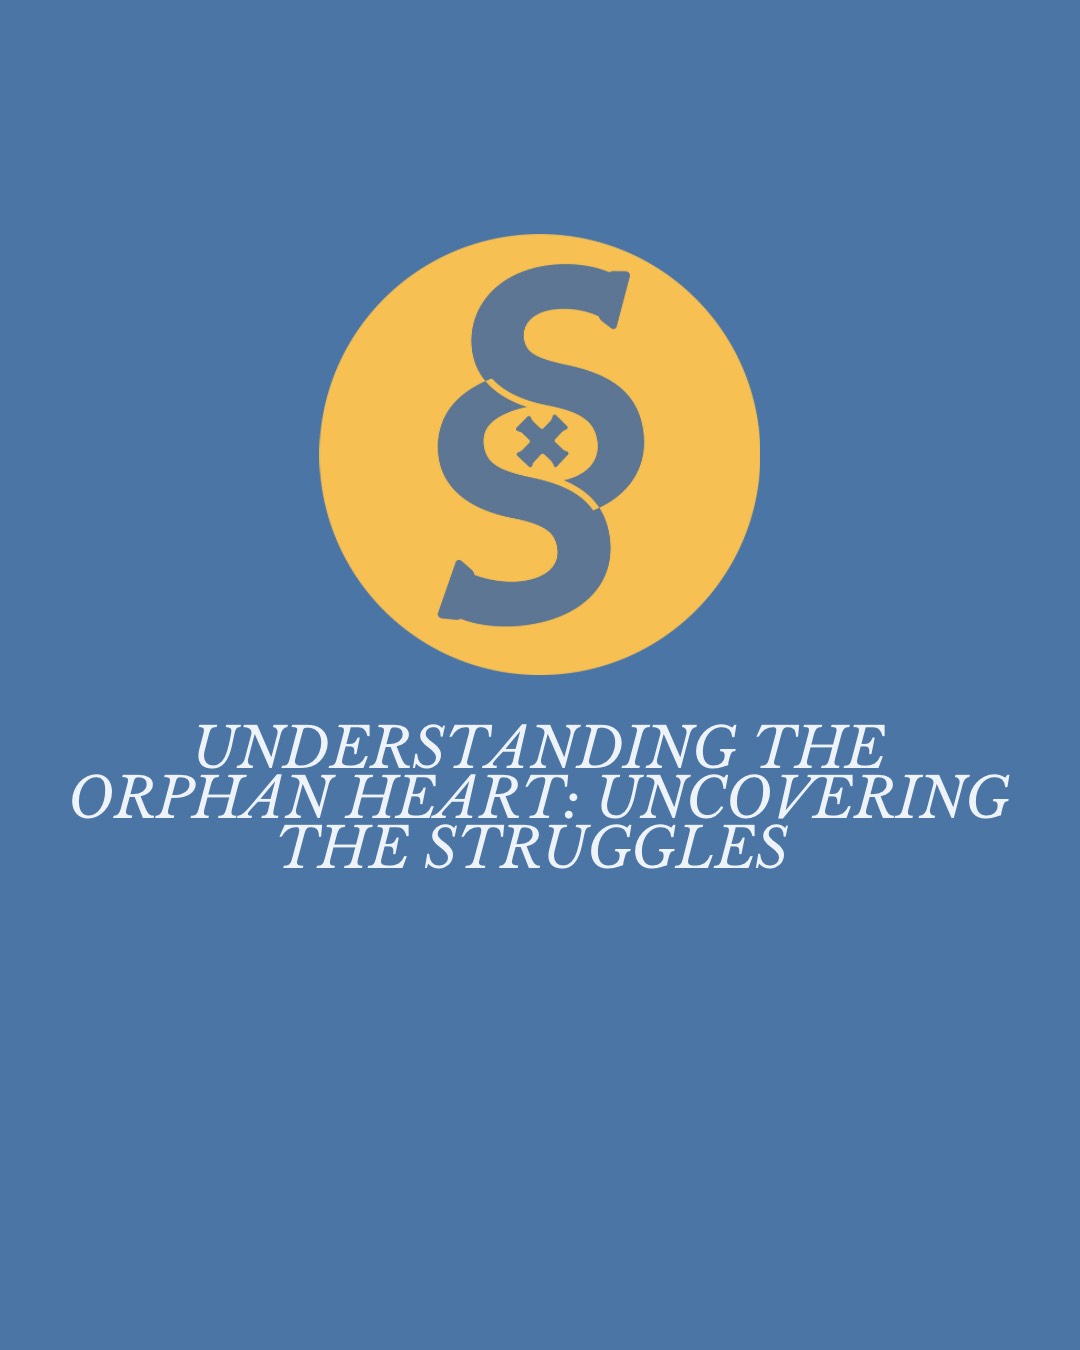 Understanding the Orphan Heart: Uncovering the Struggles